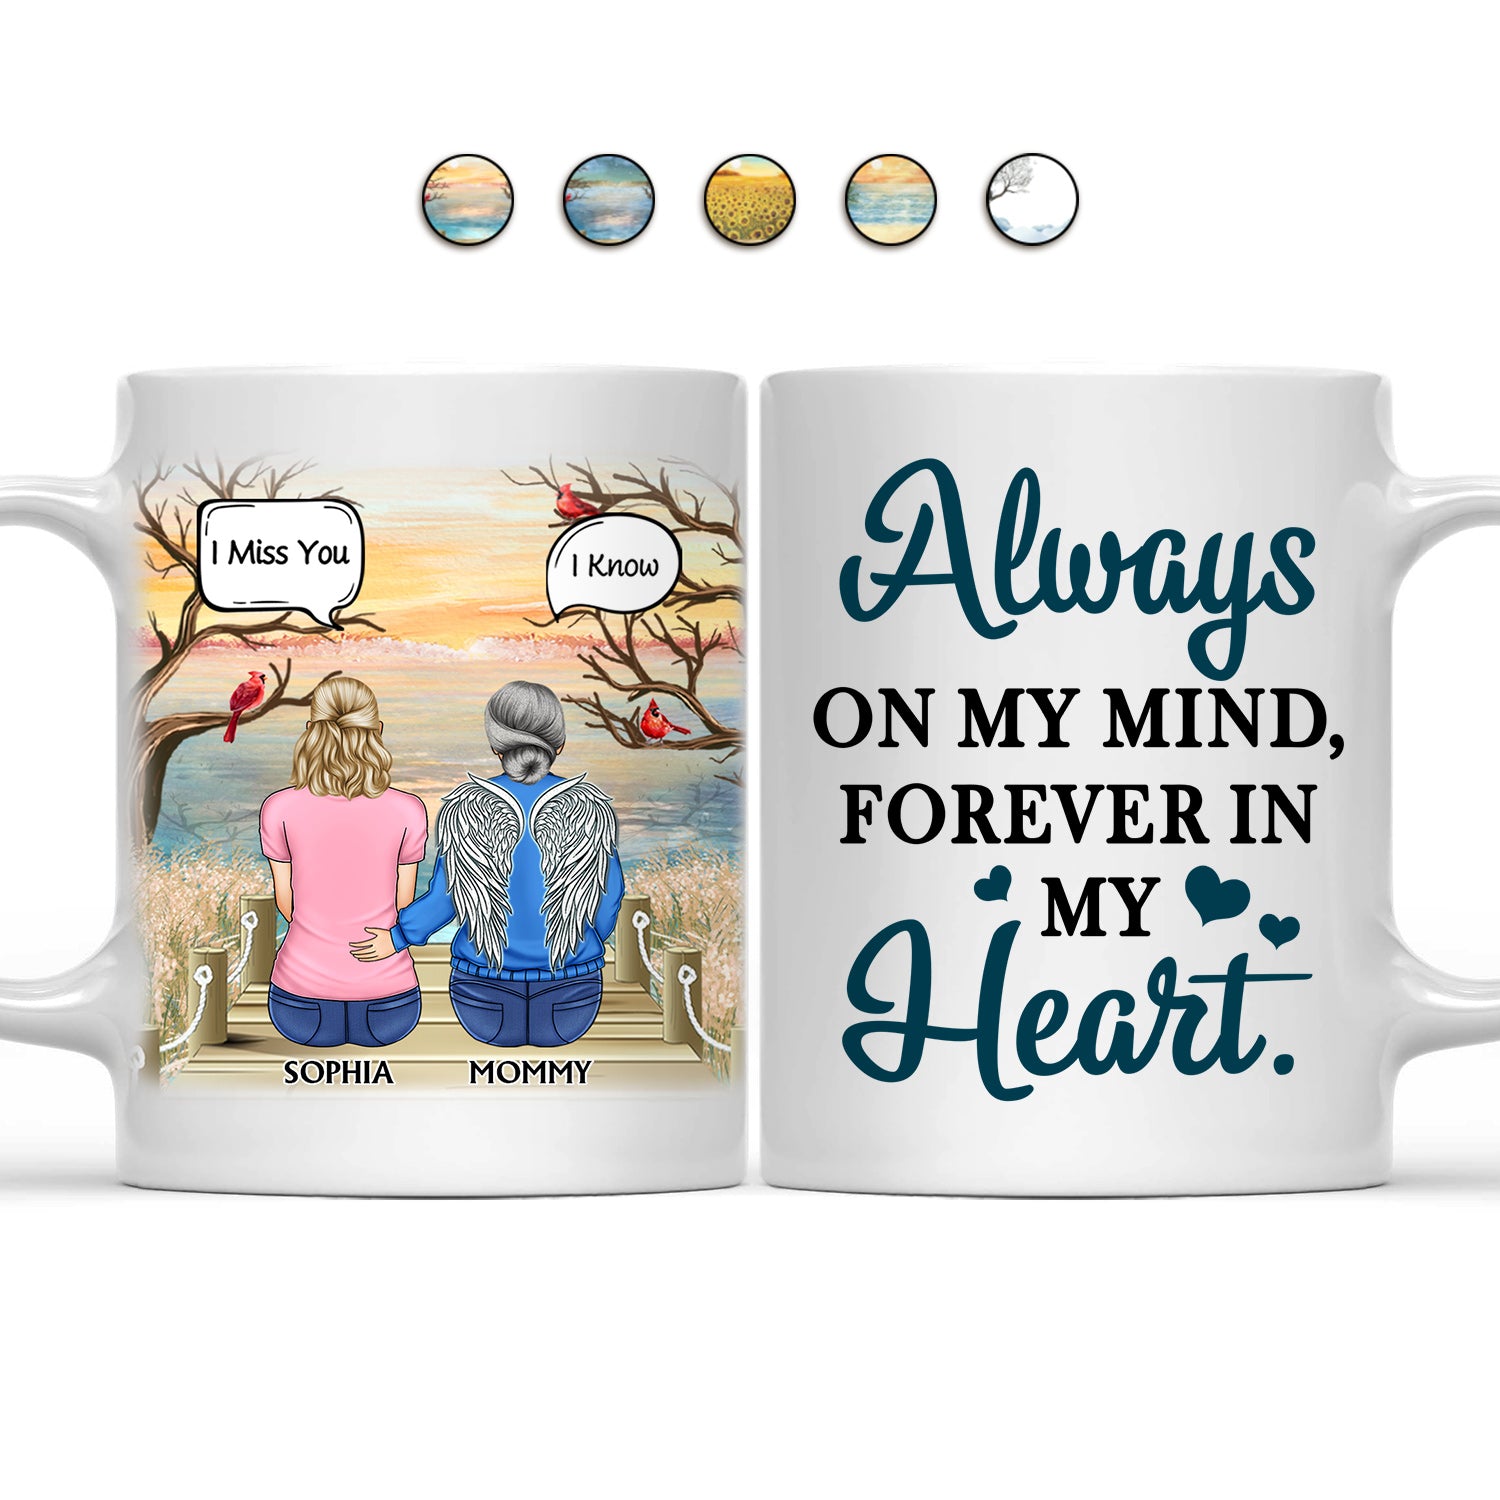 I Miss You I Know - Memorial Gift For Family, Friends, Siblings - Personalized Mug